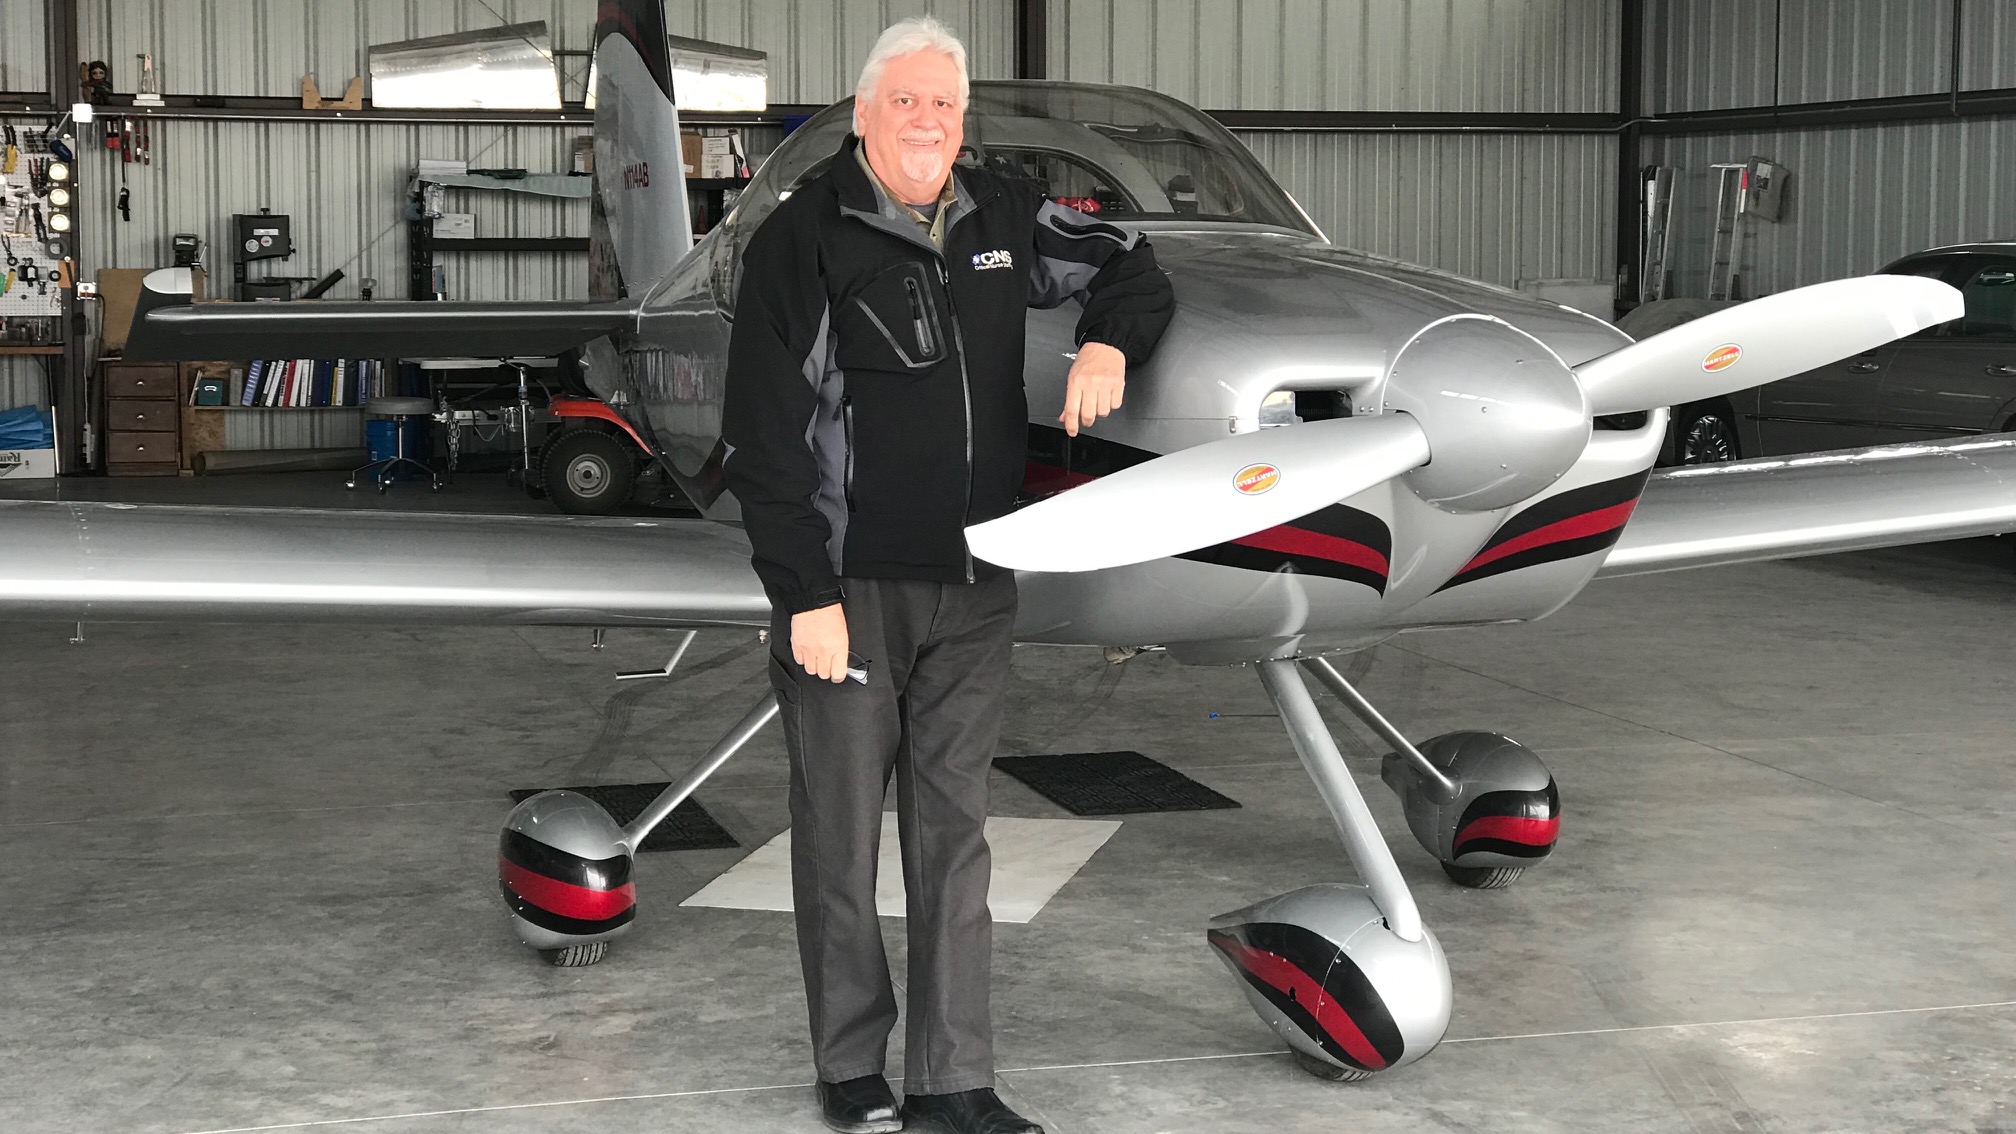 Bernie Hartnell’s passion meets creativity and results in building an aircraft